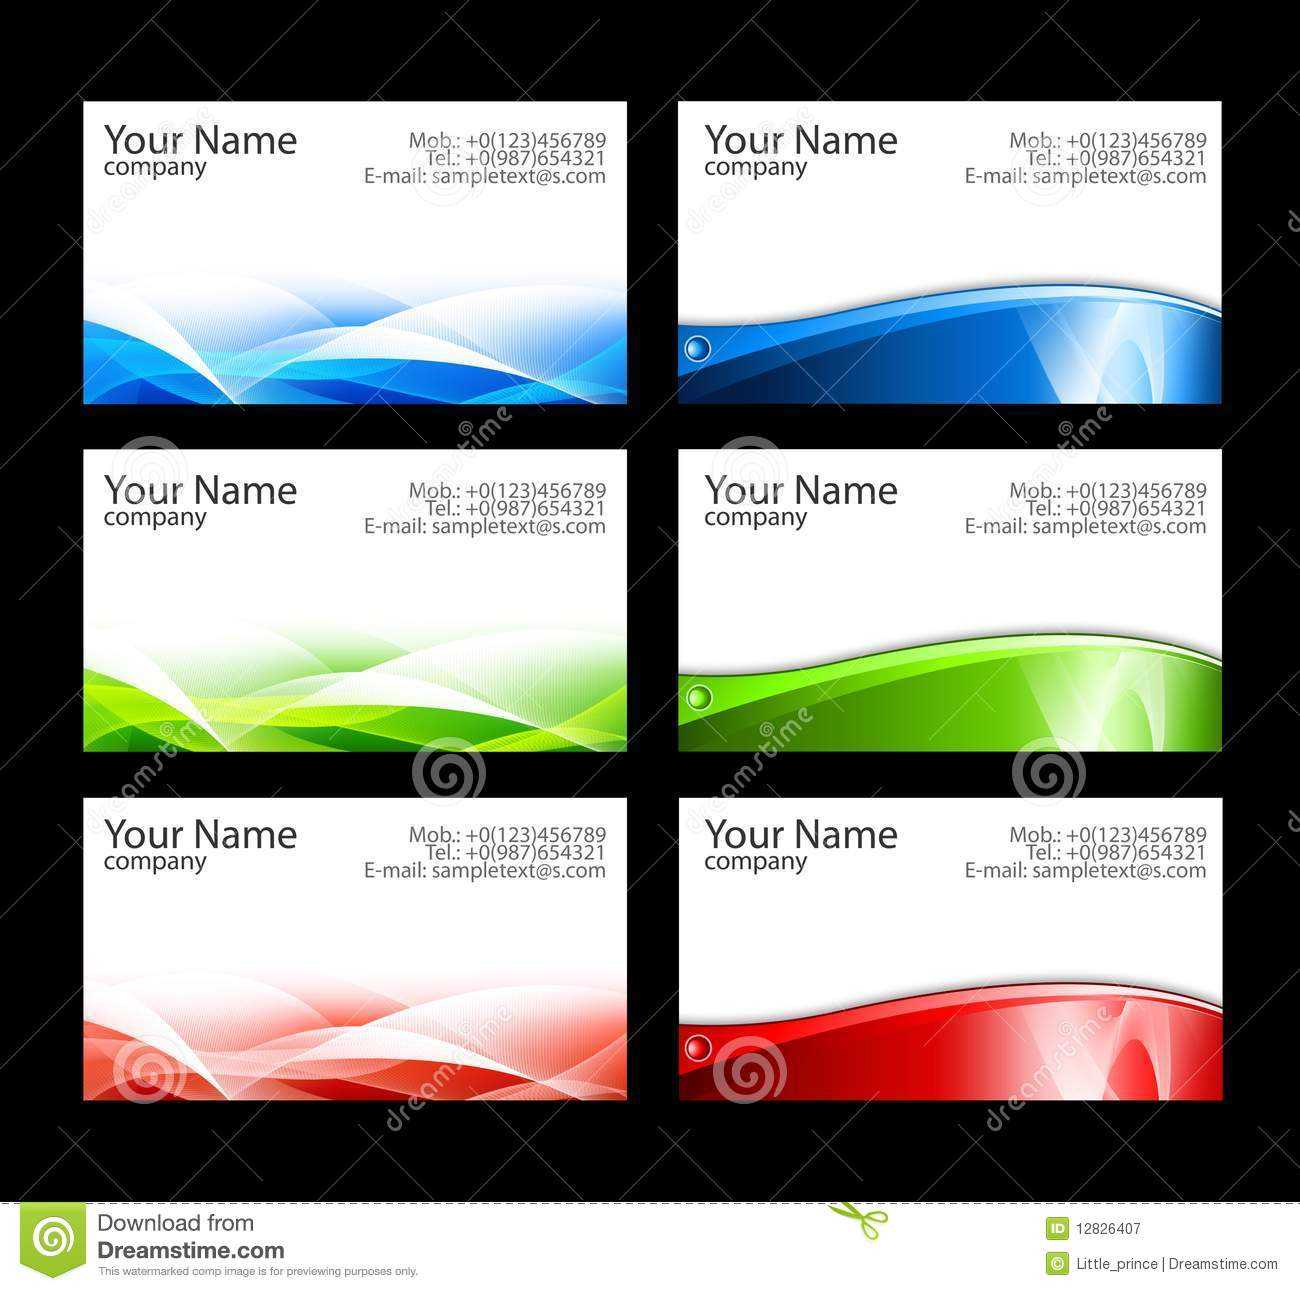 Business Cards Templates Stock Illustration. Illustration Of Throughout Free Template Business Cards To Print